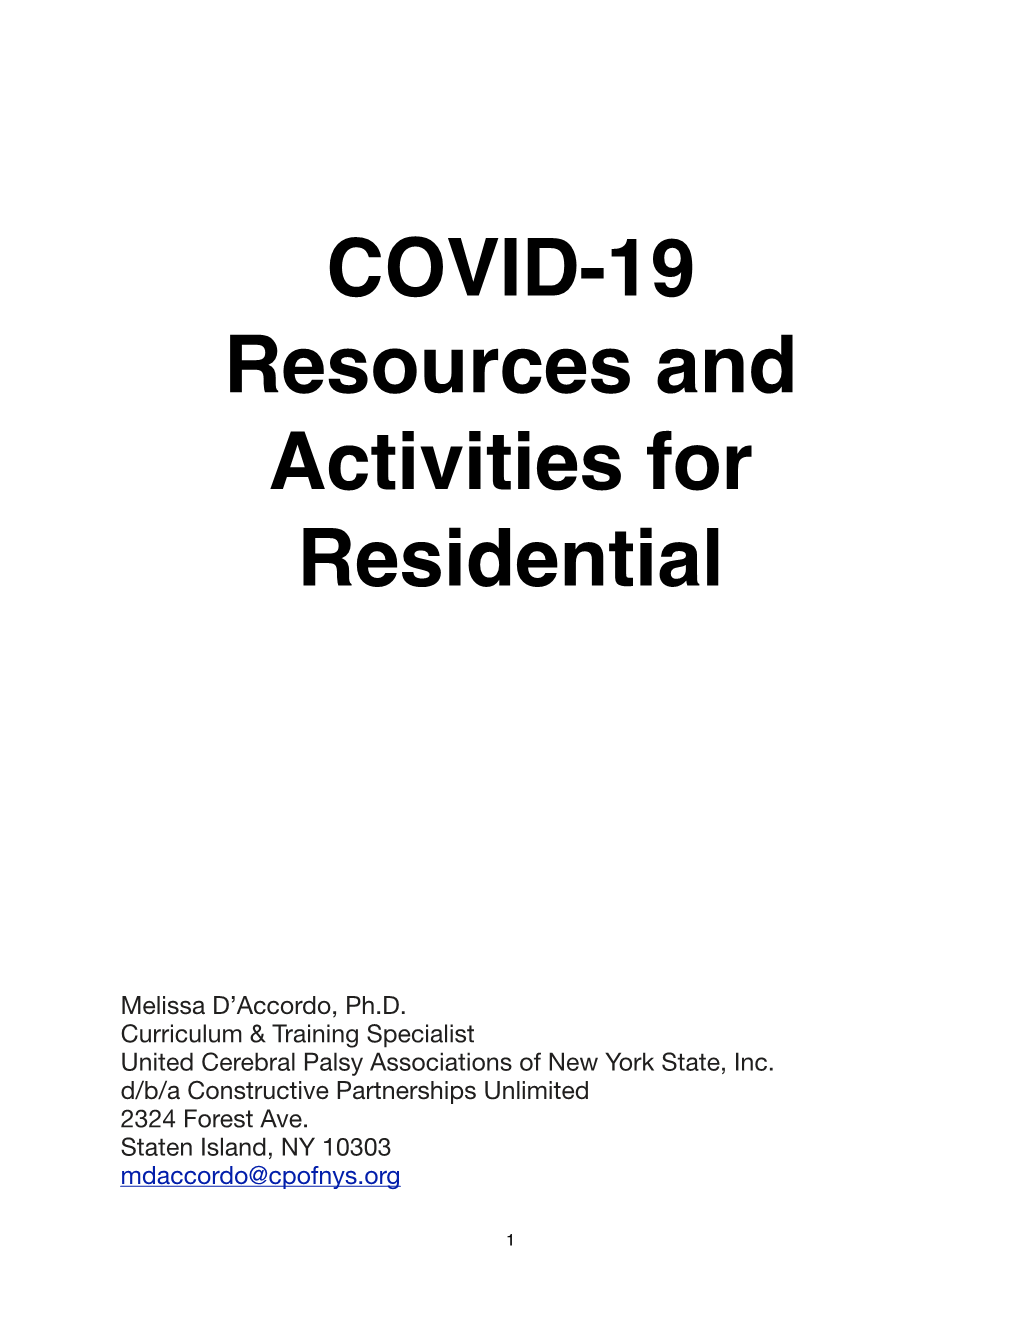 COVID-19 Resources and Activities for Residential